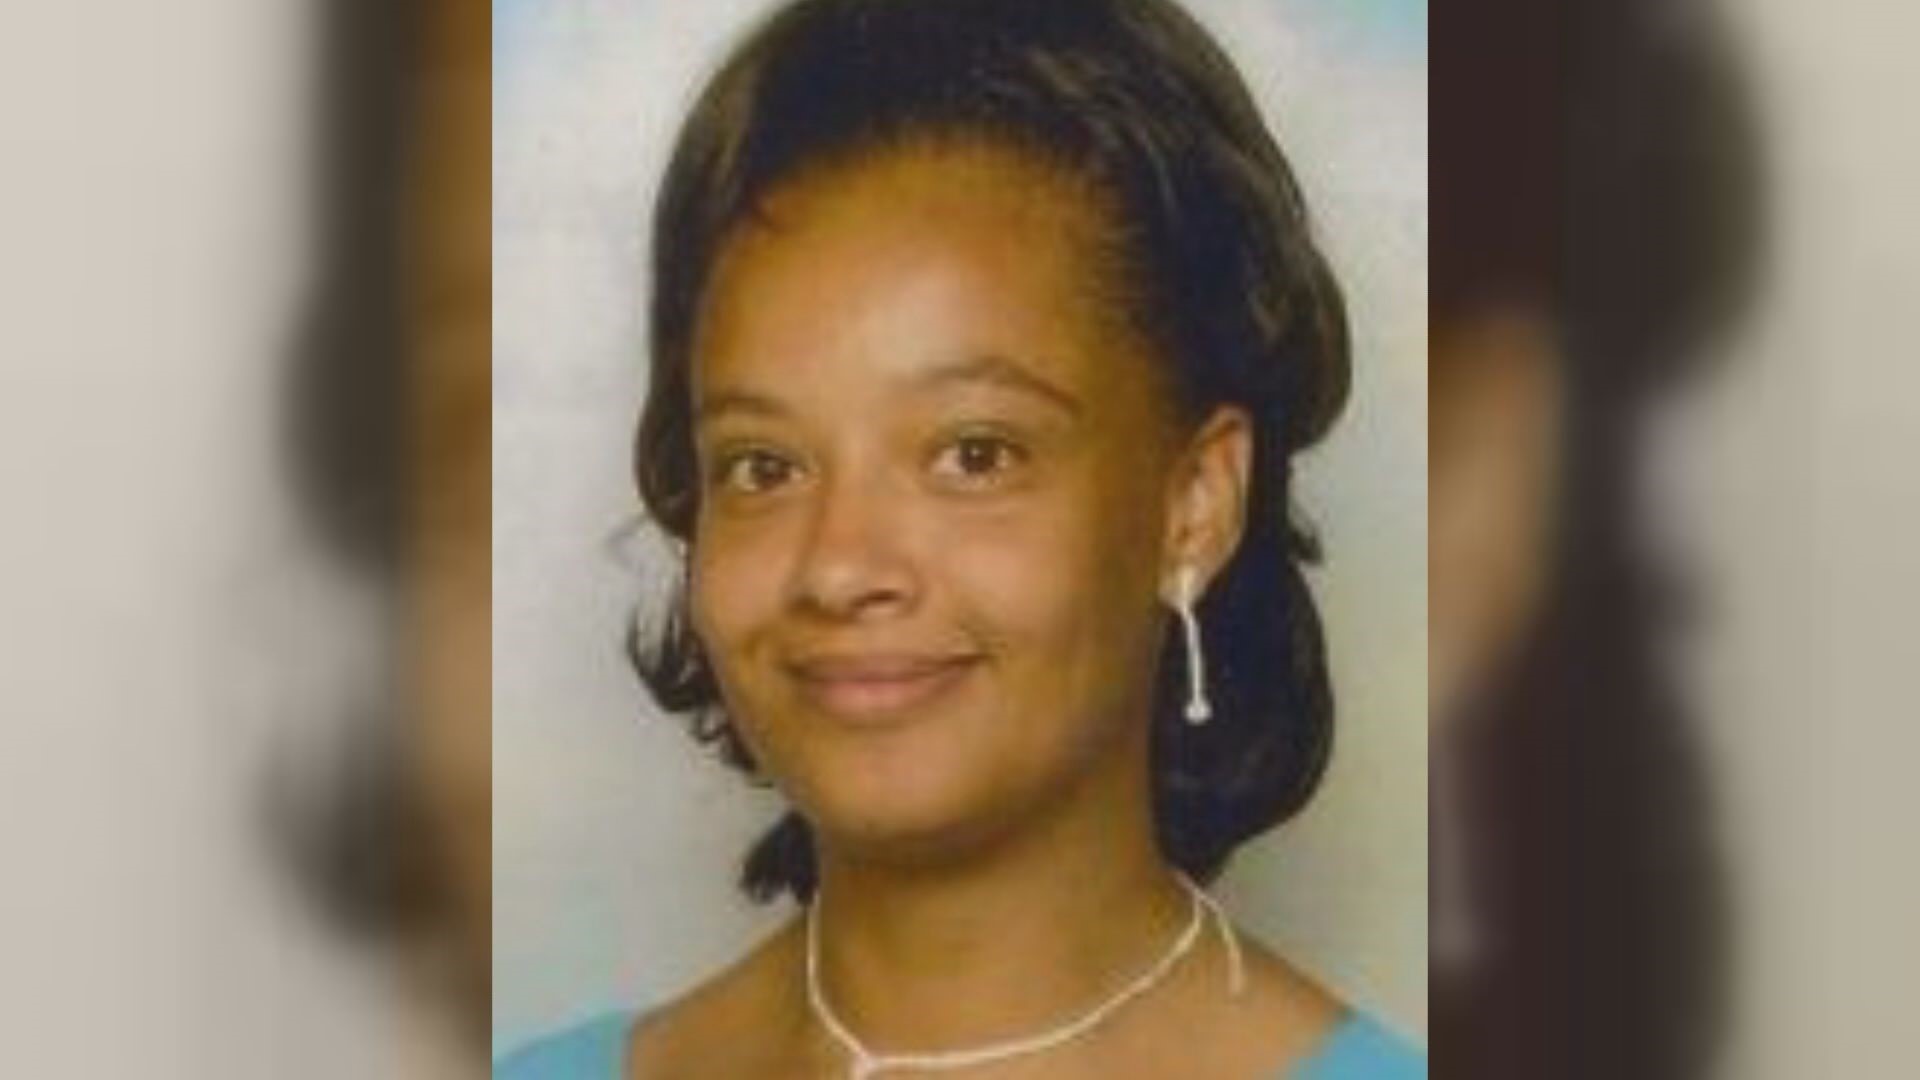 Adriana Laster's remains were positively identified, and now officers are working to charge Freddie Grant with murder.